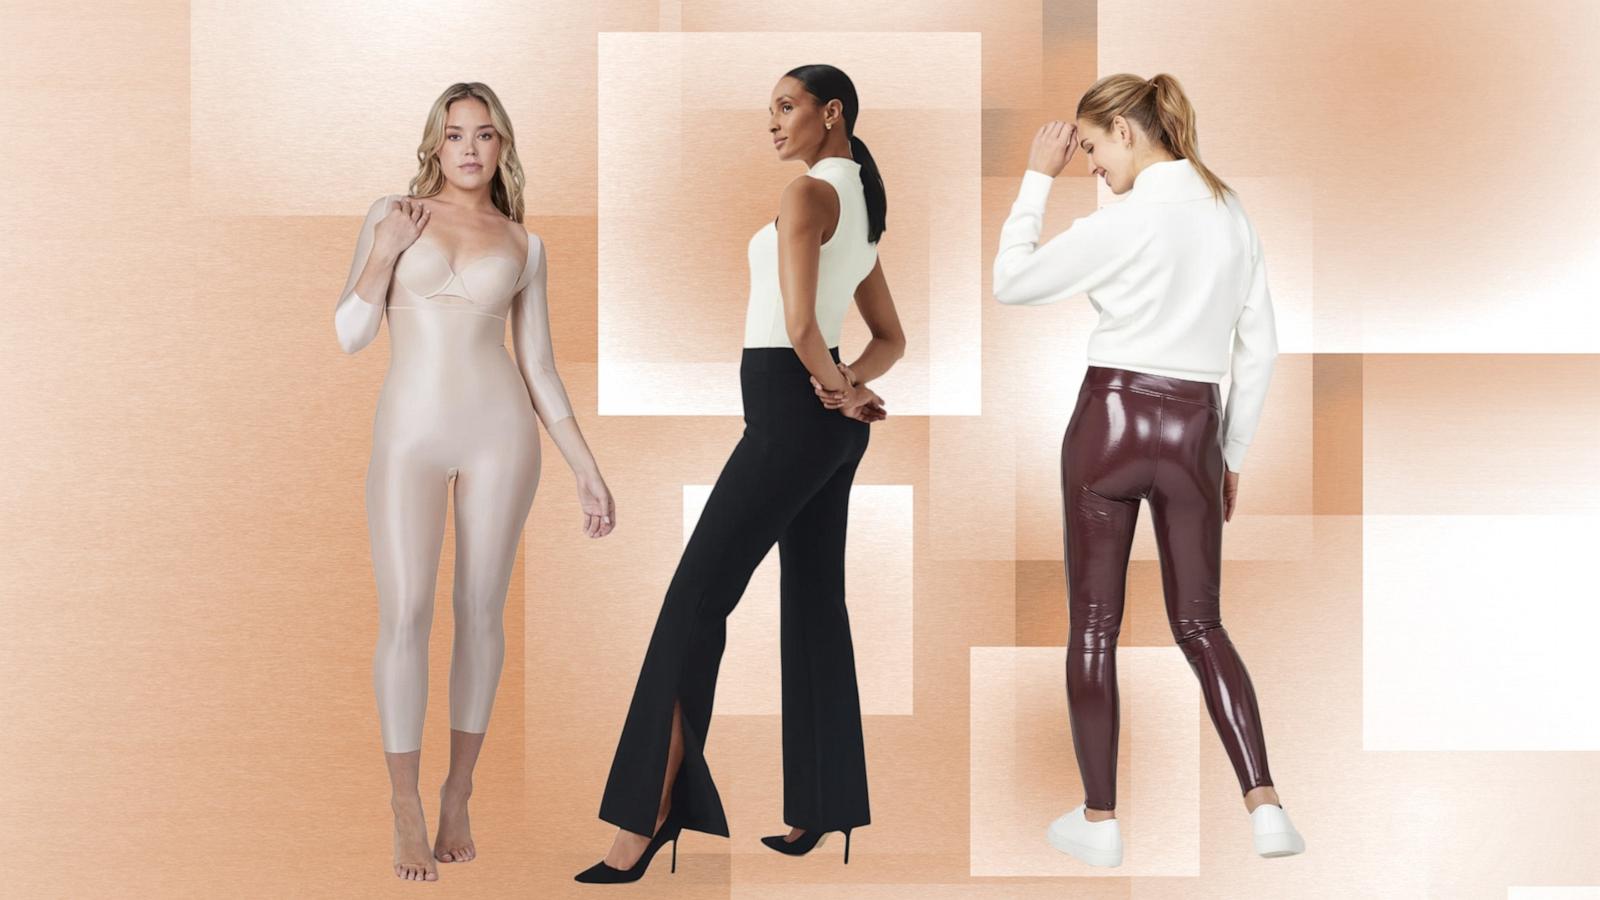 The Spanx End of Season Sale ends today: Get up to 70% off